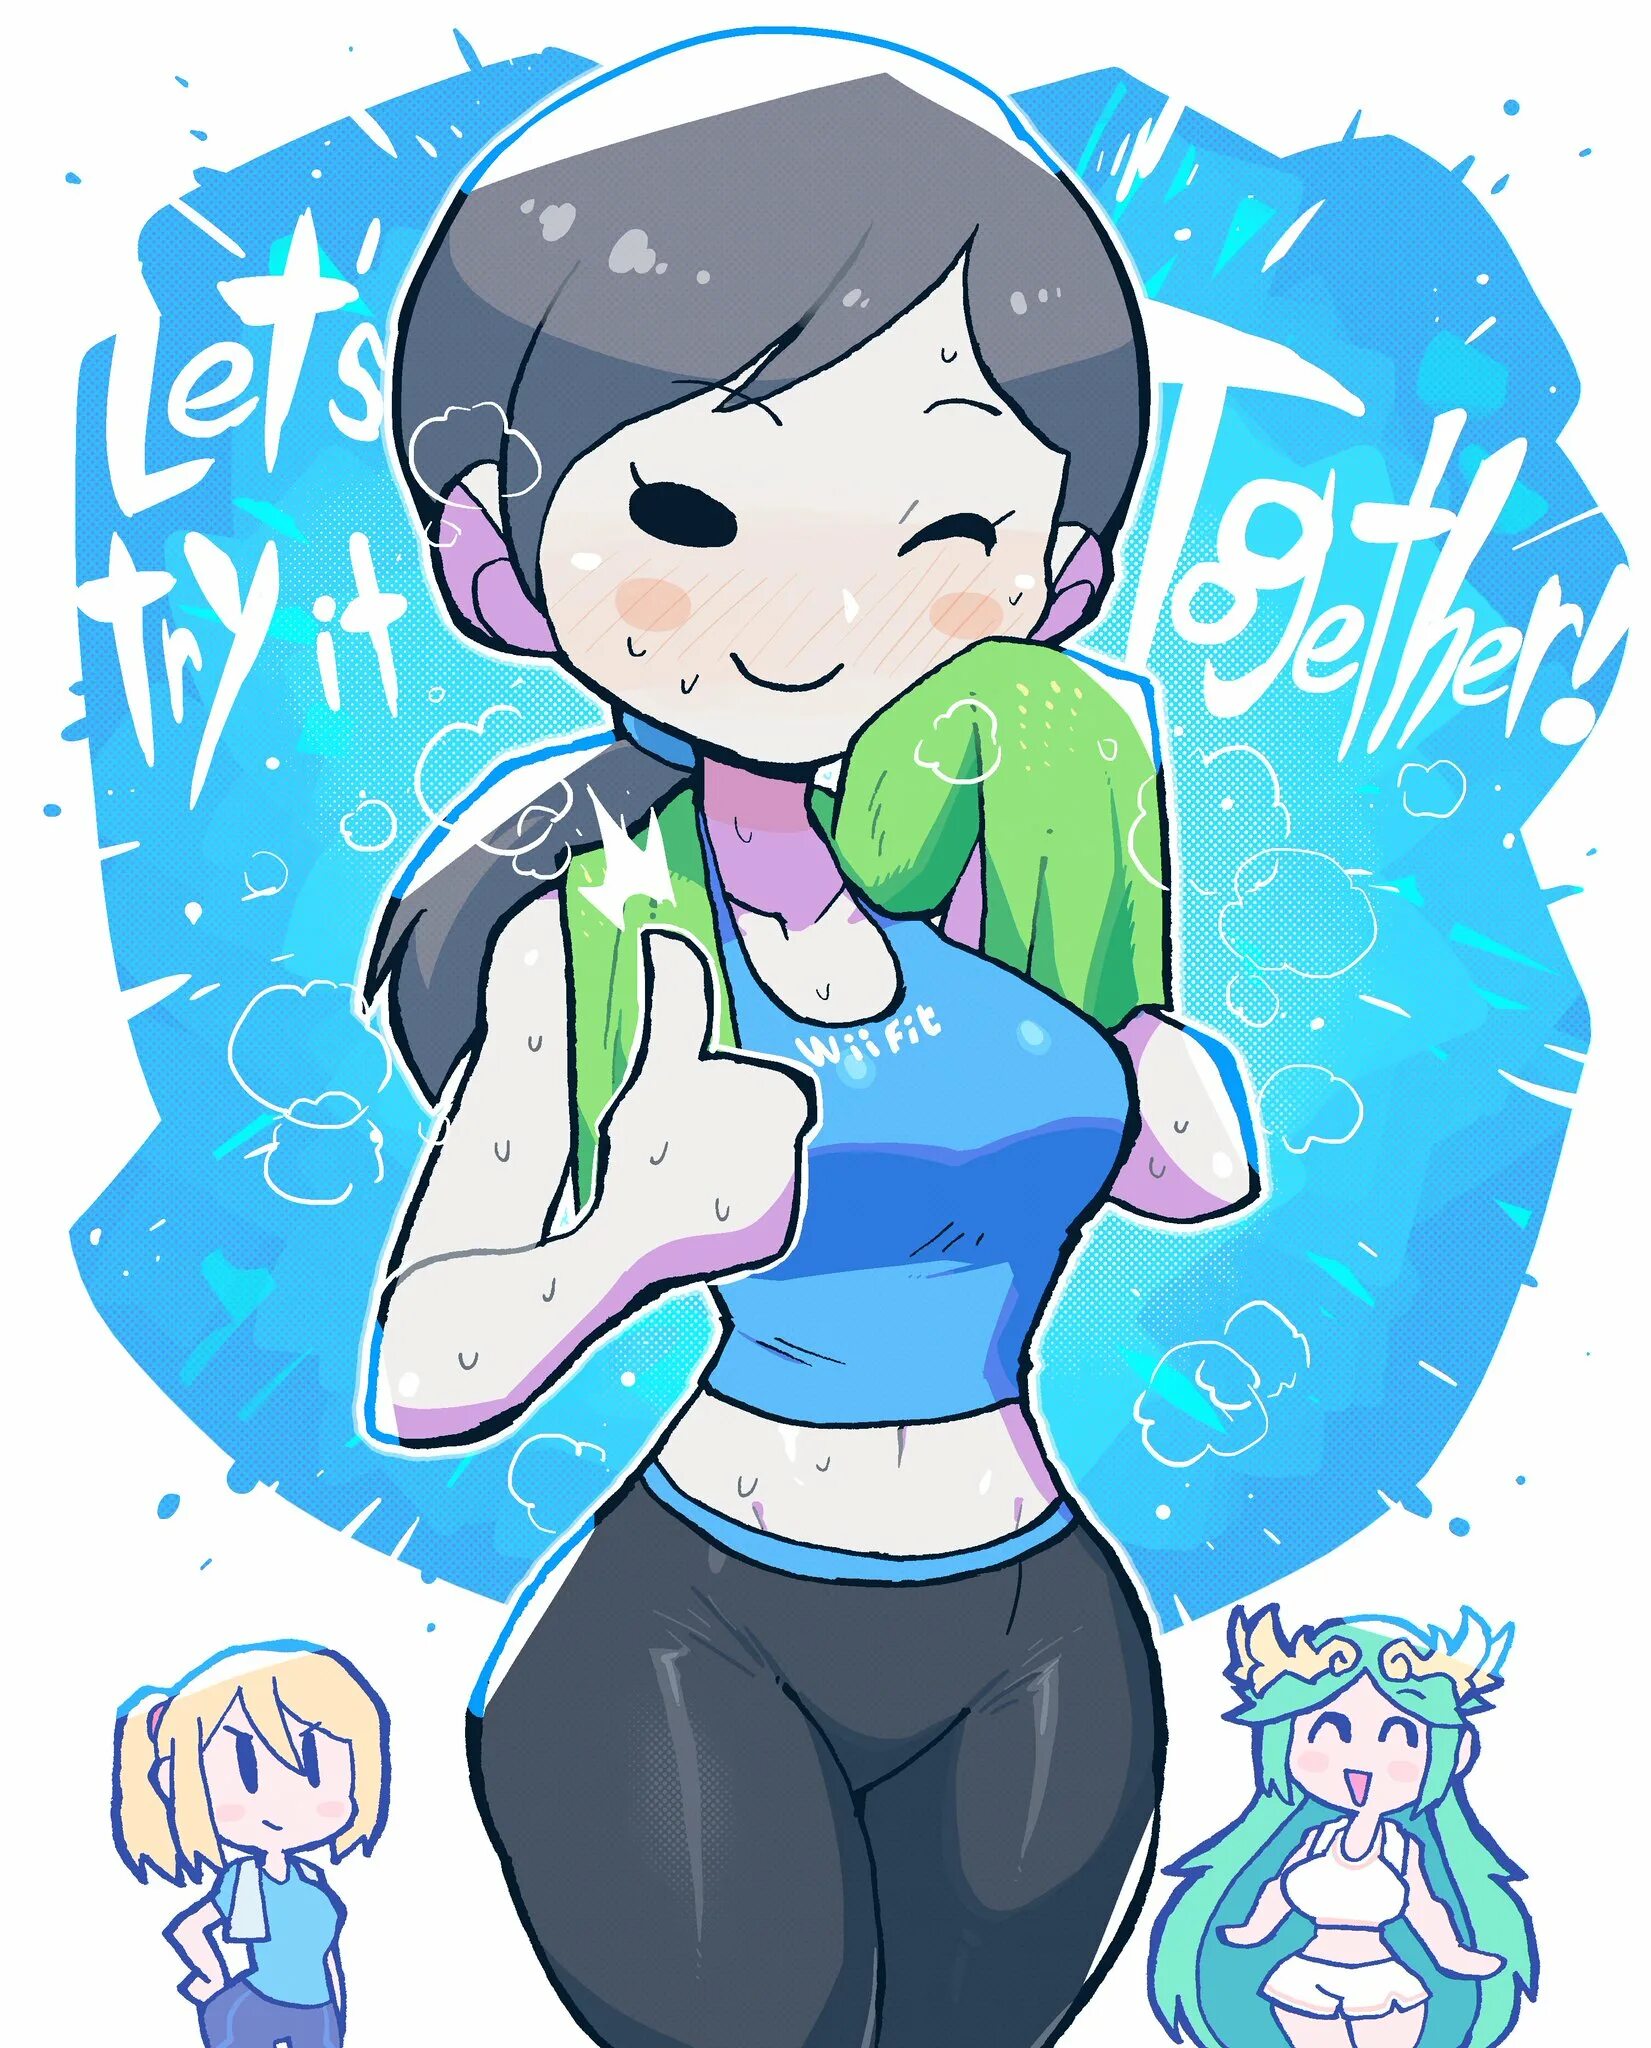 Wii Fit Trainer 34. Тренер Wii Fit Art. Wii Fit futa. Wii Fit Trainer и Самус.